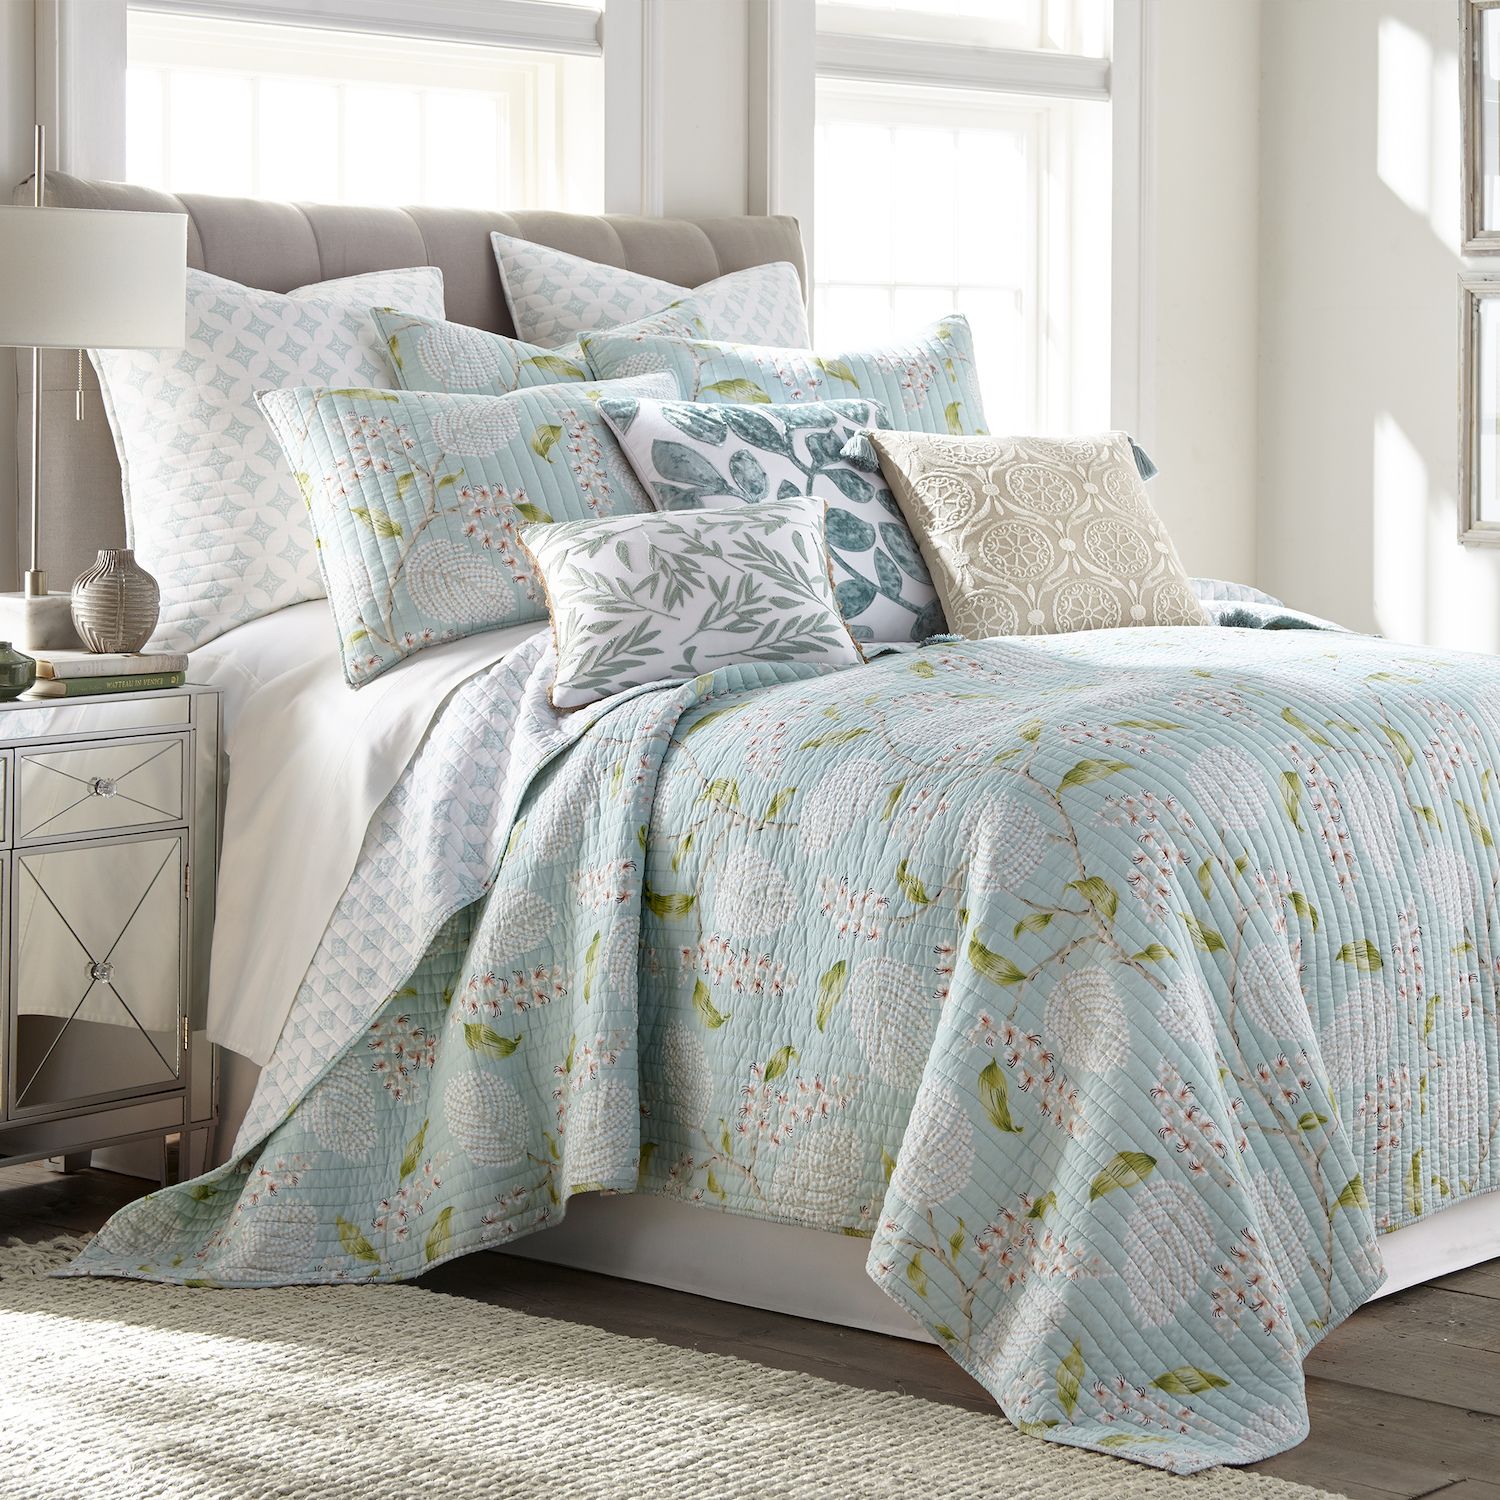 Image for Levtex Home Brookwood Quilt Set with Shams at Kohl's.